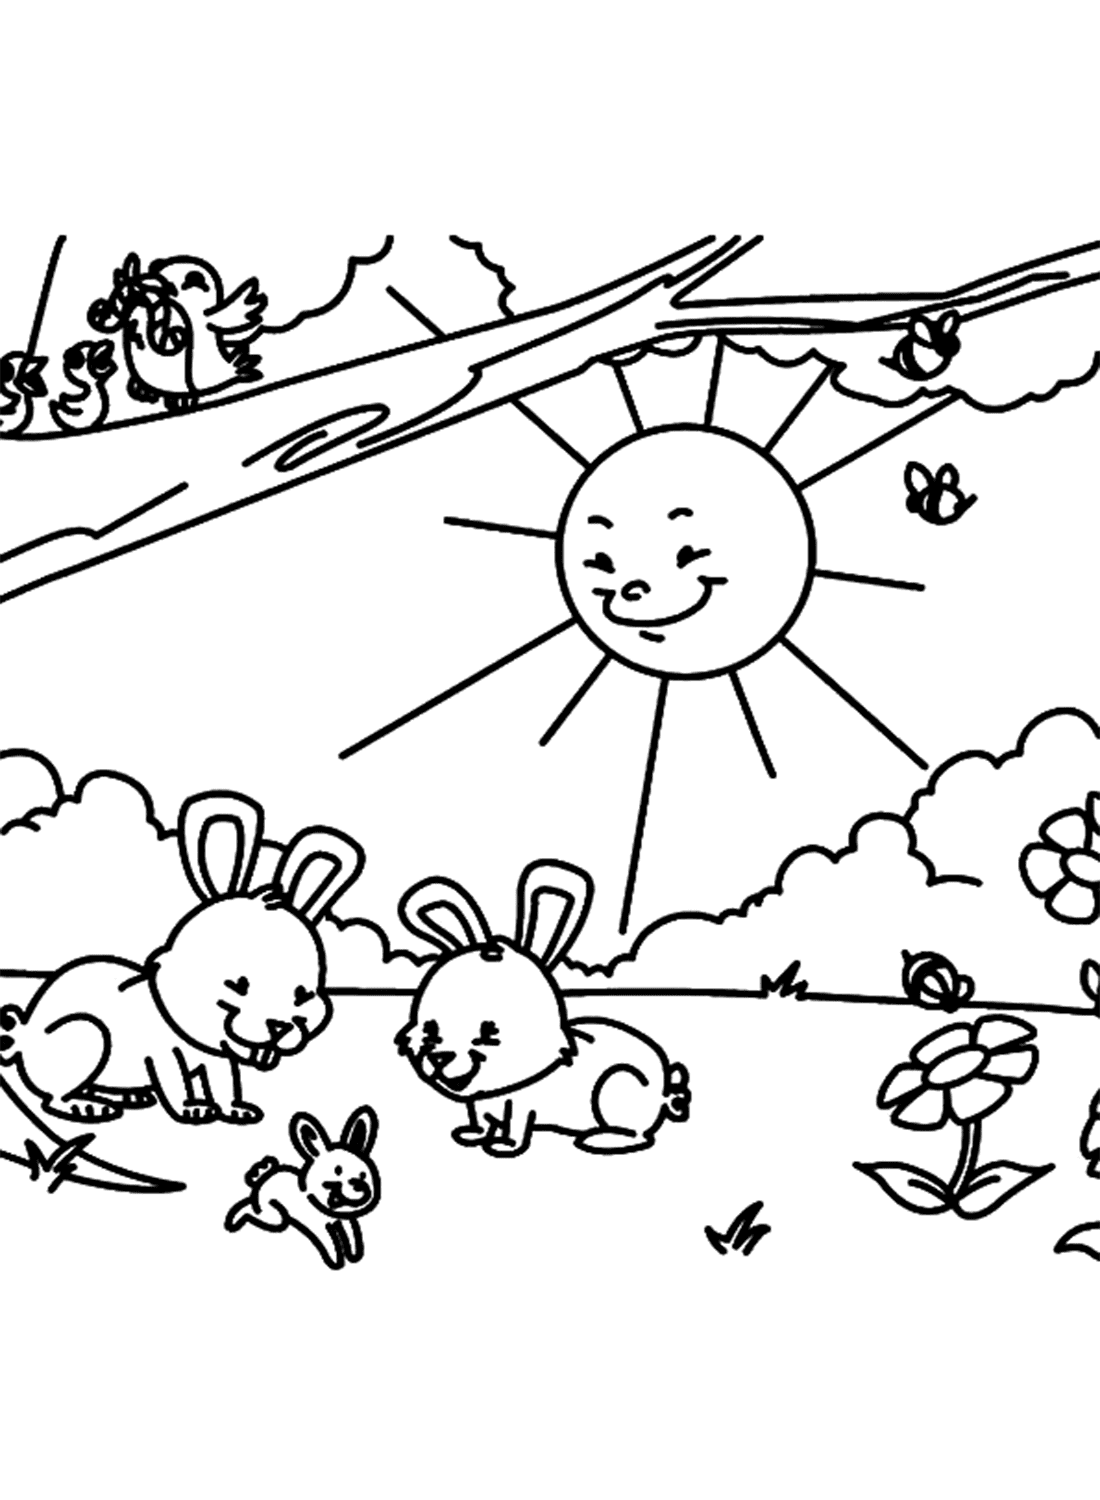 Rabbits in Spring Coloring Page